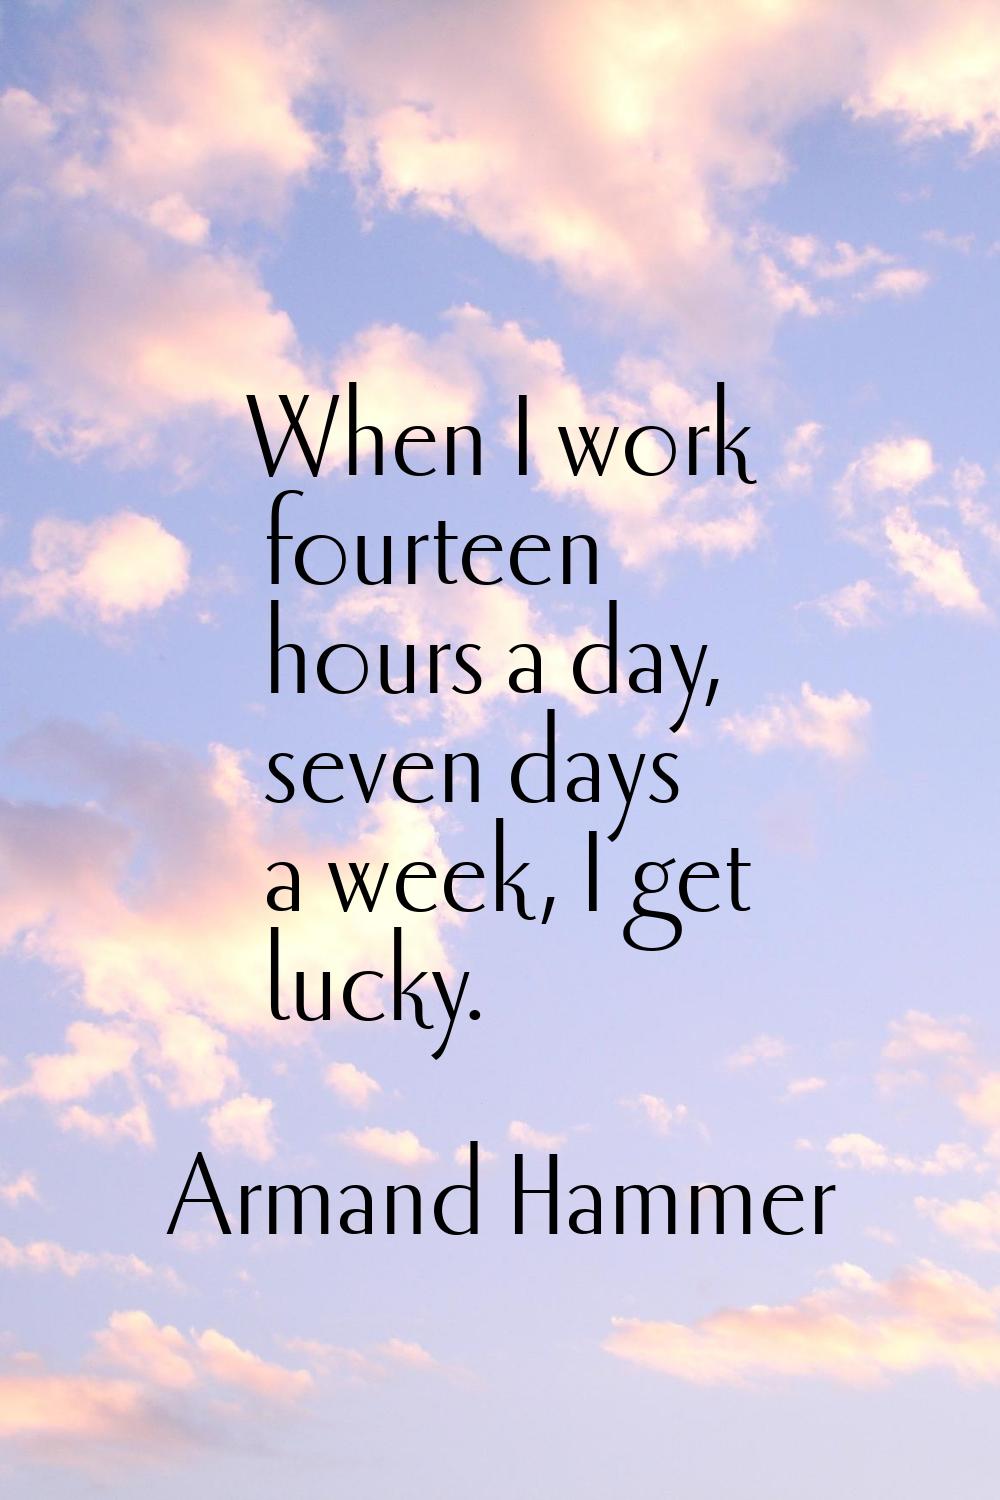 When I work fourteen hours a day, seven days a week, I get lucky.